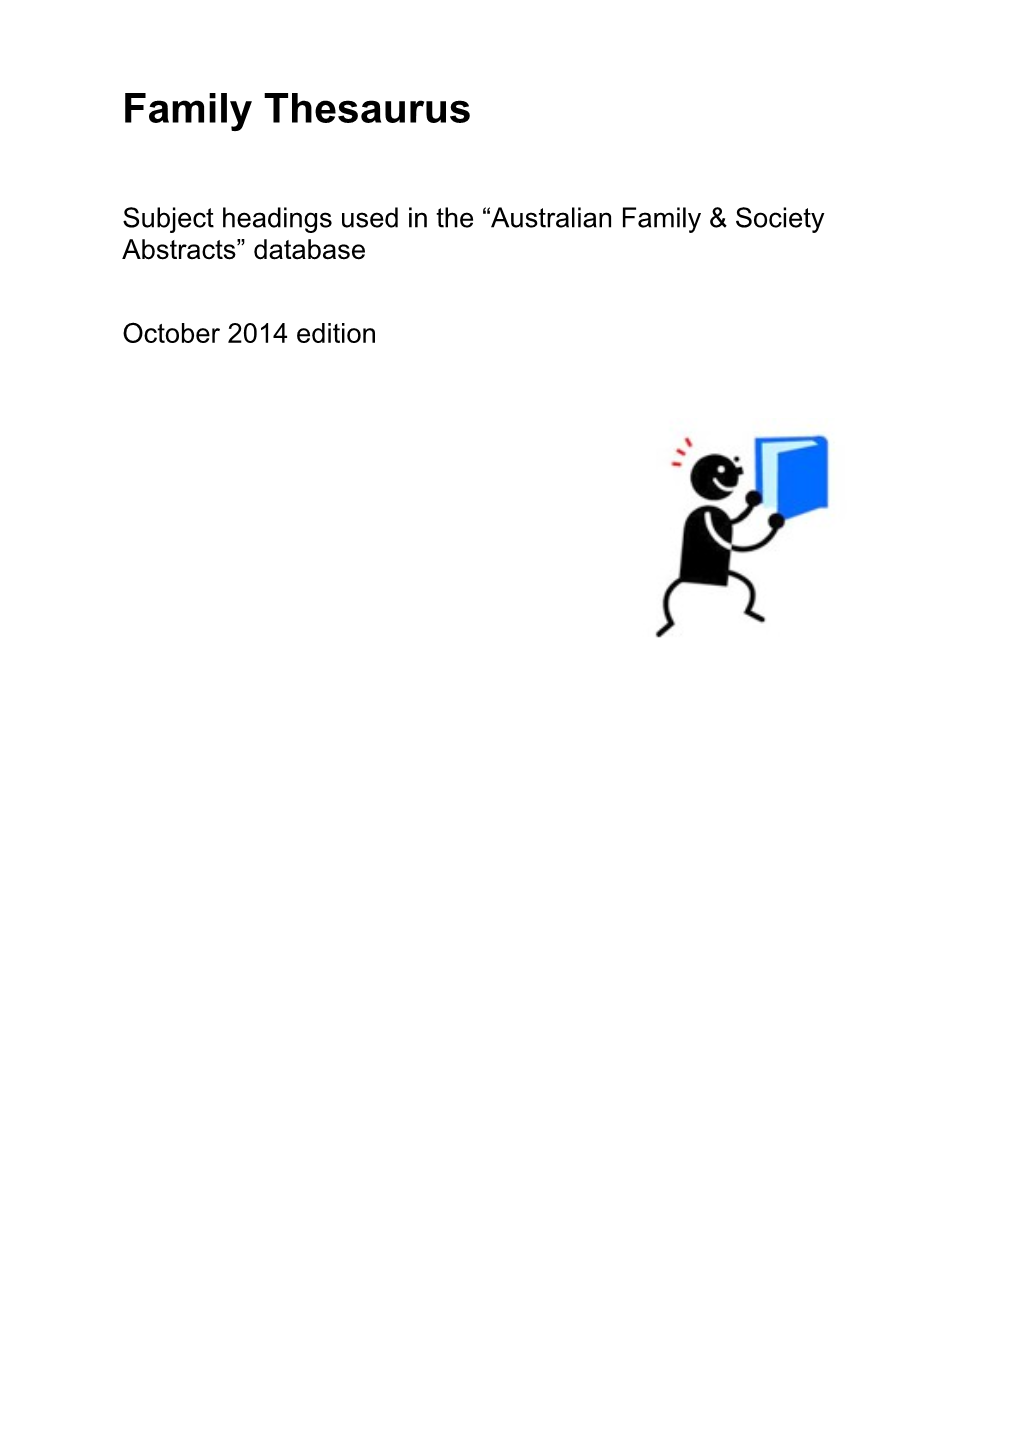 Subject Headings Used in the Australian Family & Society Abstracts Database